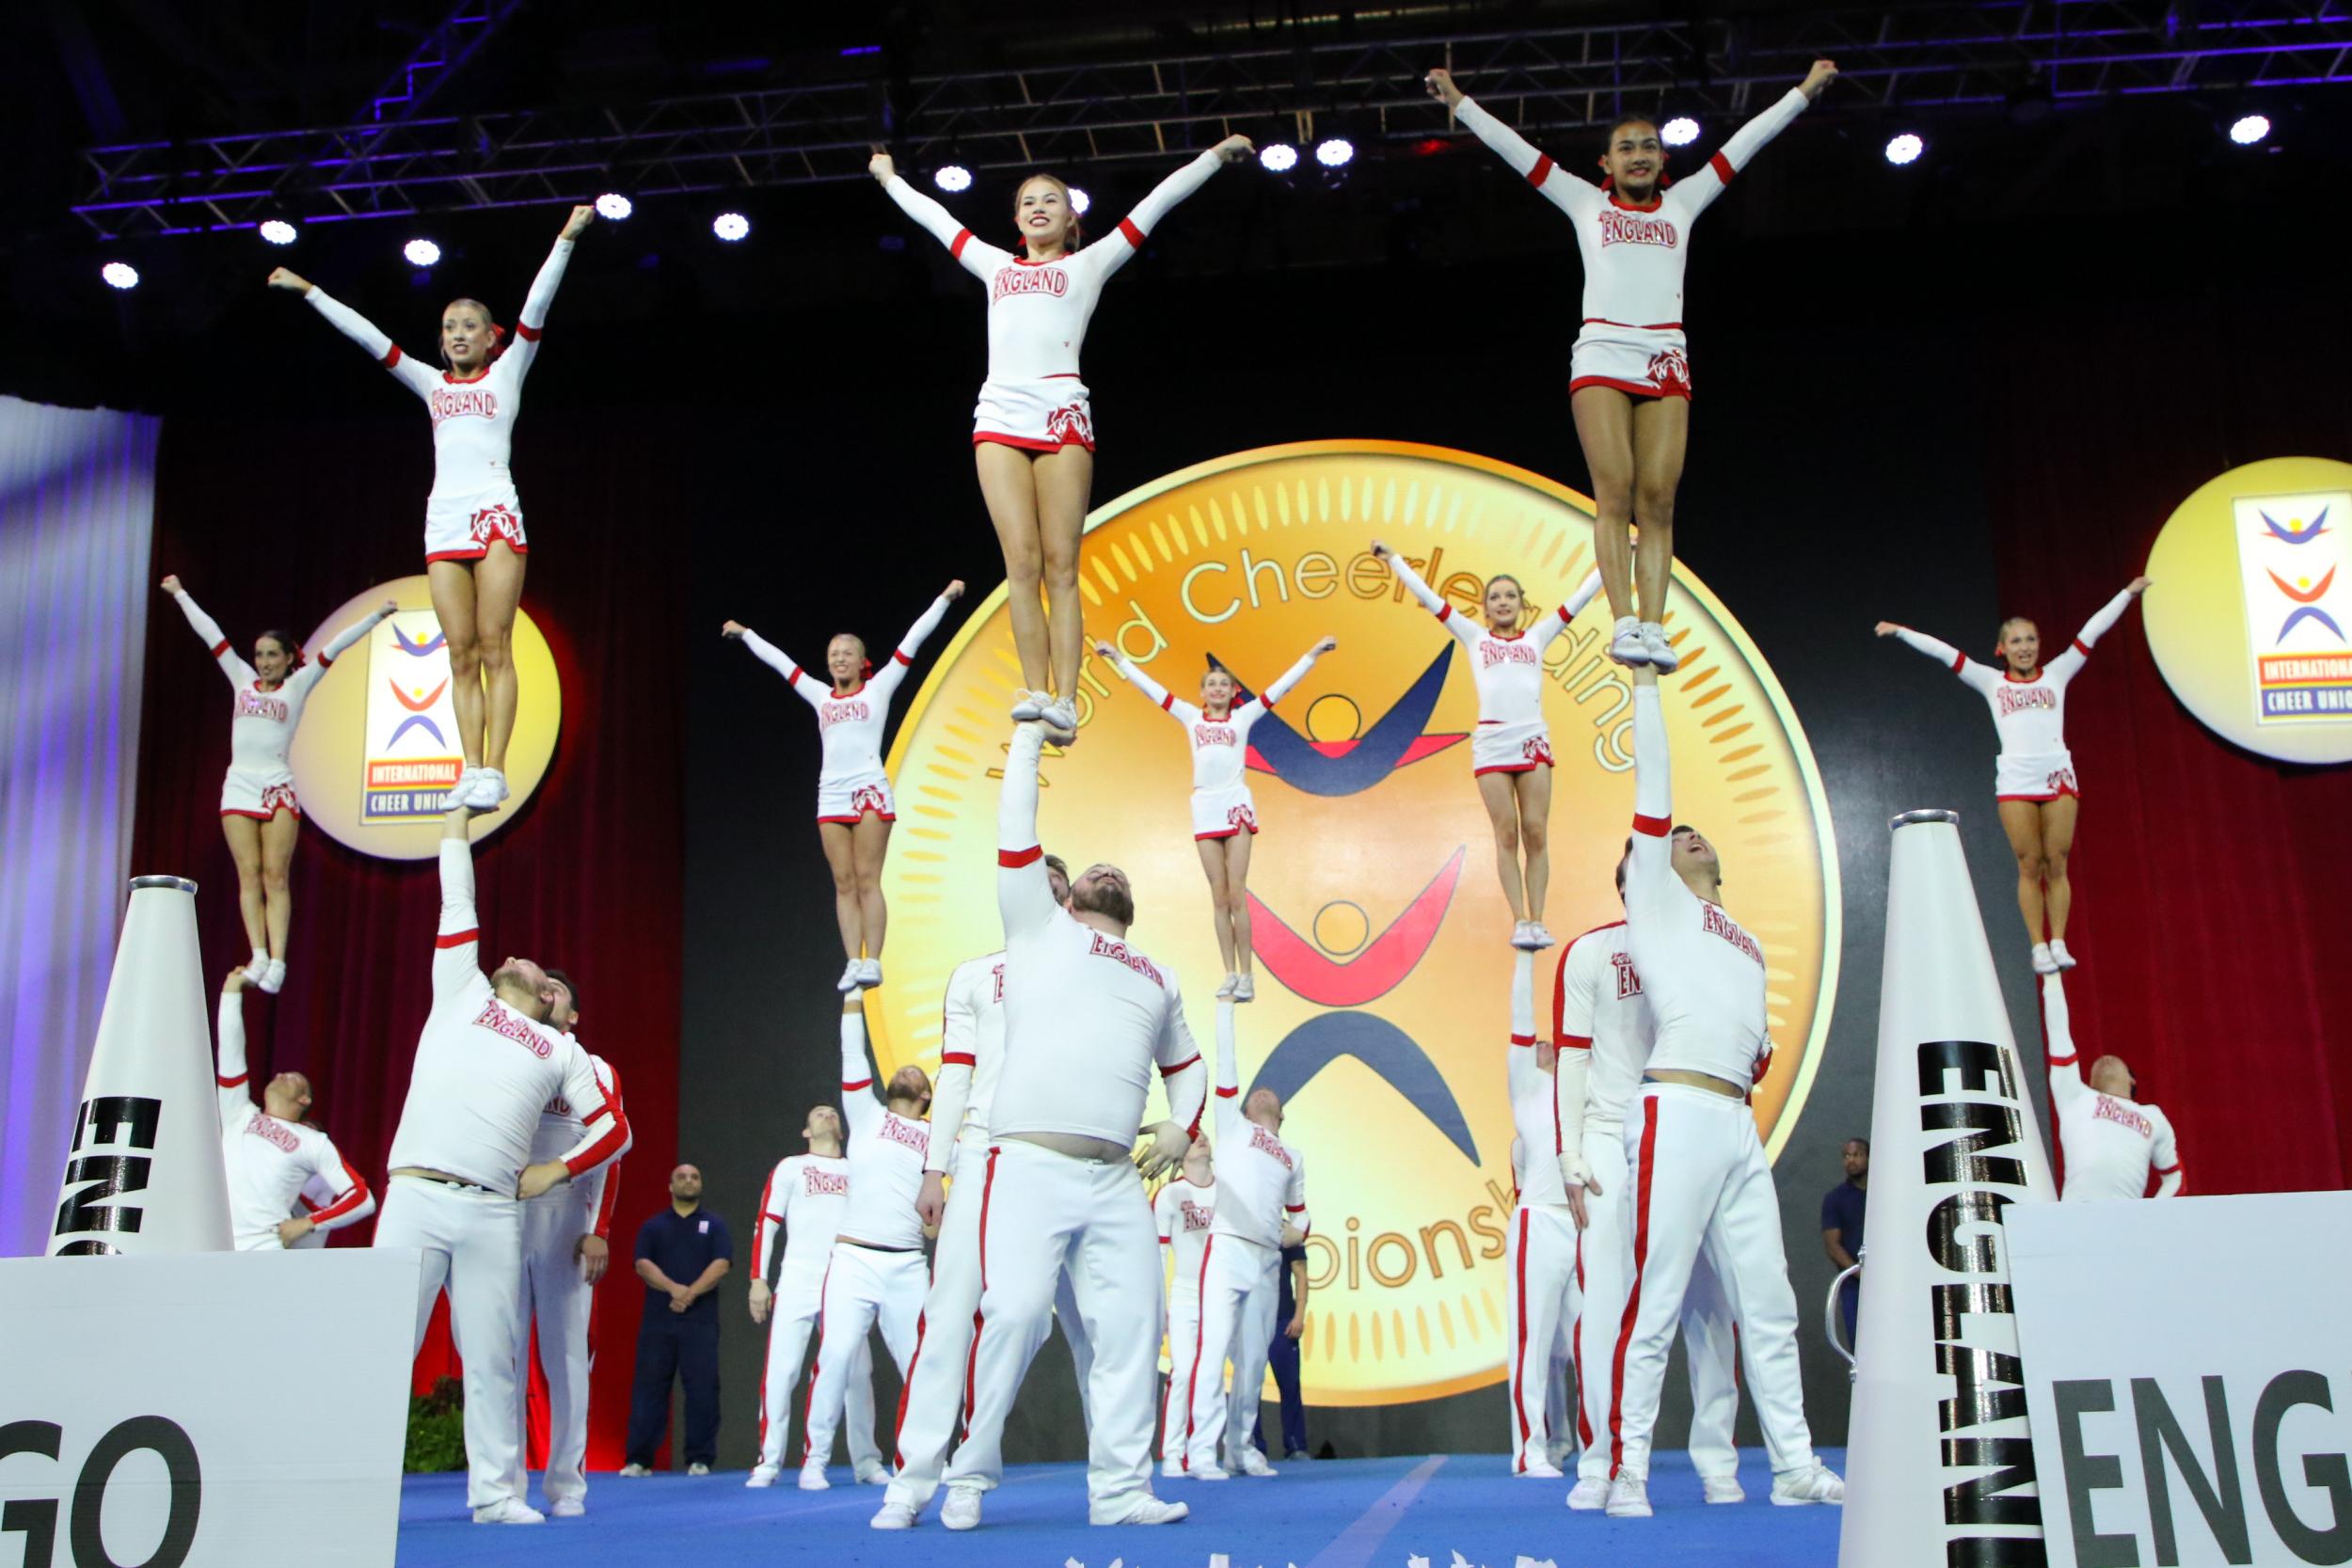 Team England compete at the World Championships in Orlando, Florida in 2018